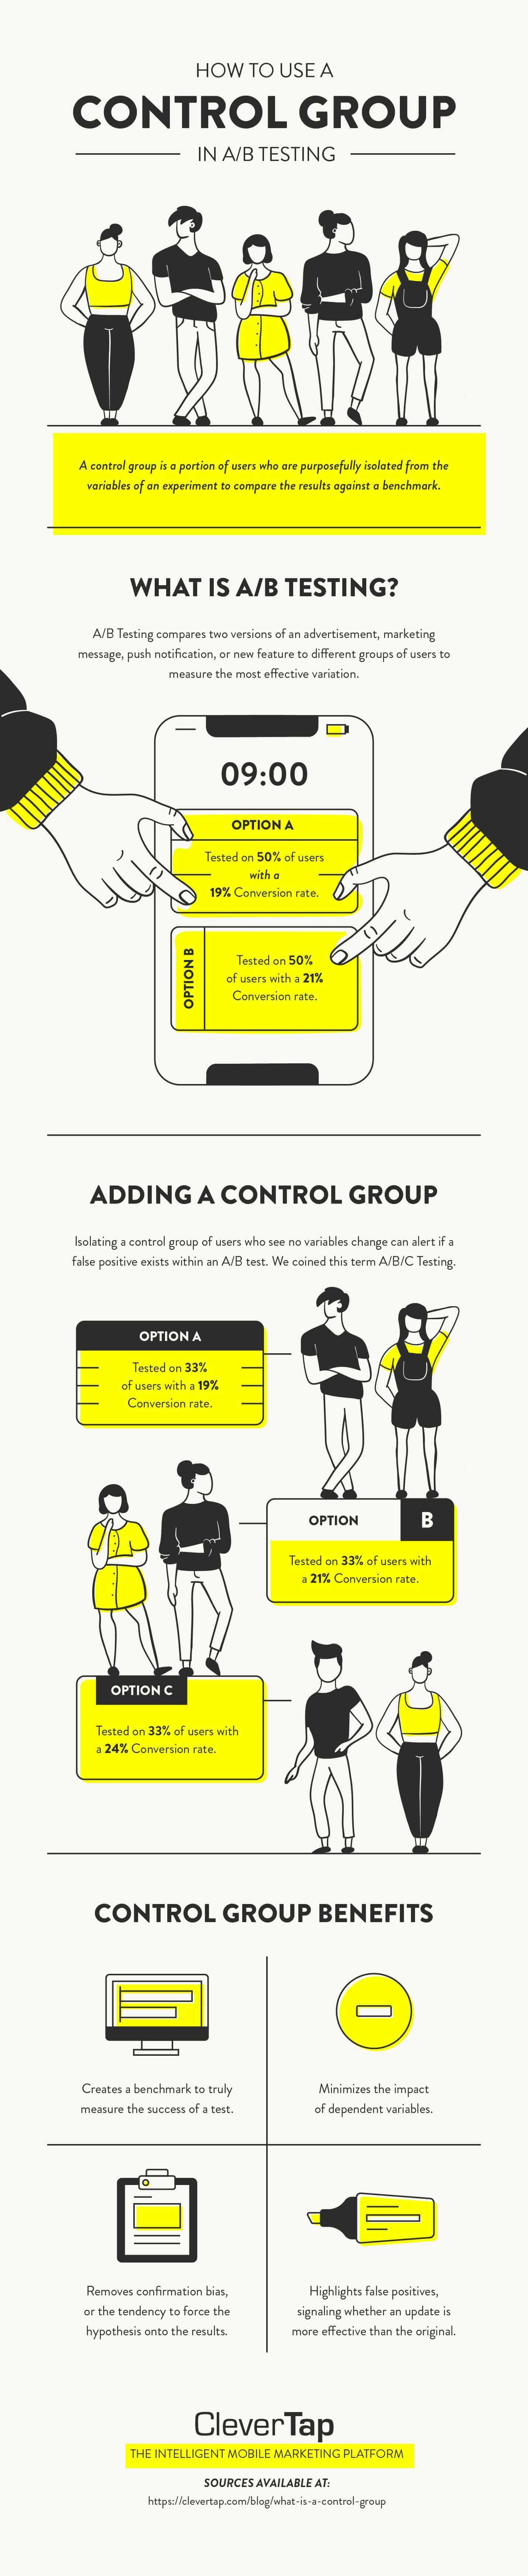 what is a control group infographic with example and tips with highlighter yellow